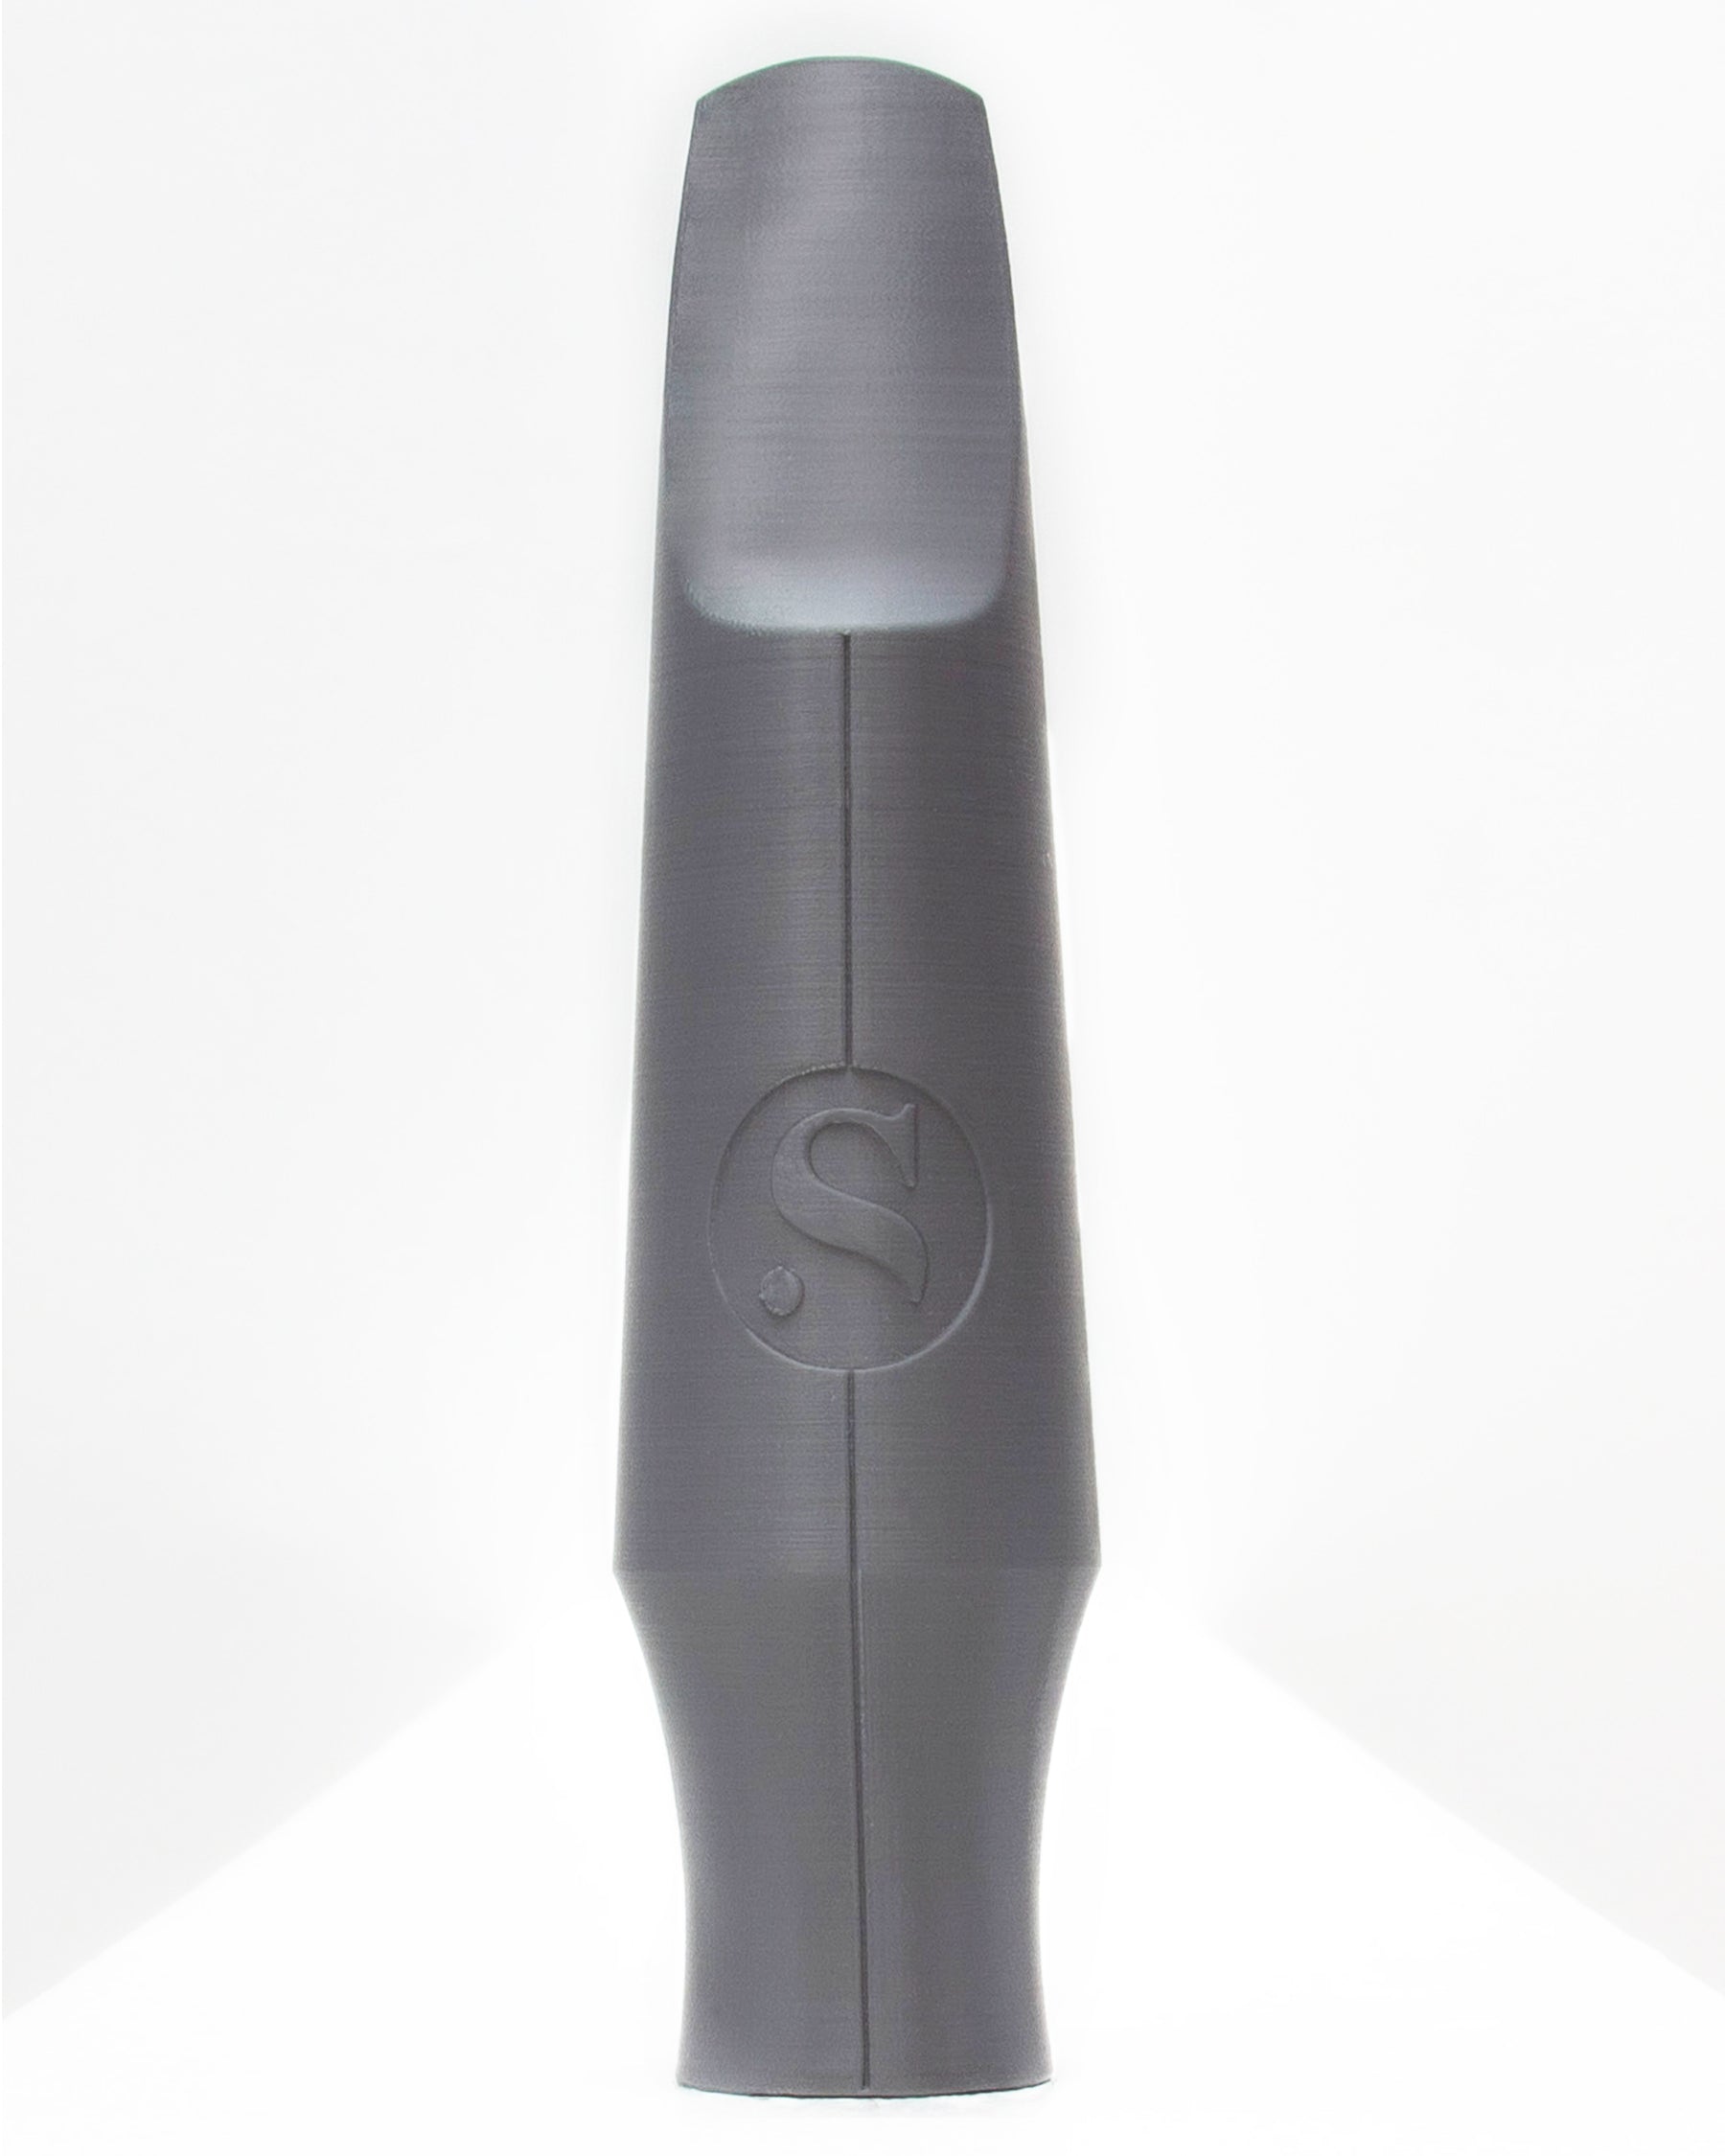 Bass Signature Saxophone mouthpiece - Michael Wilbur by Syos - 9 / Anthracite Metal